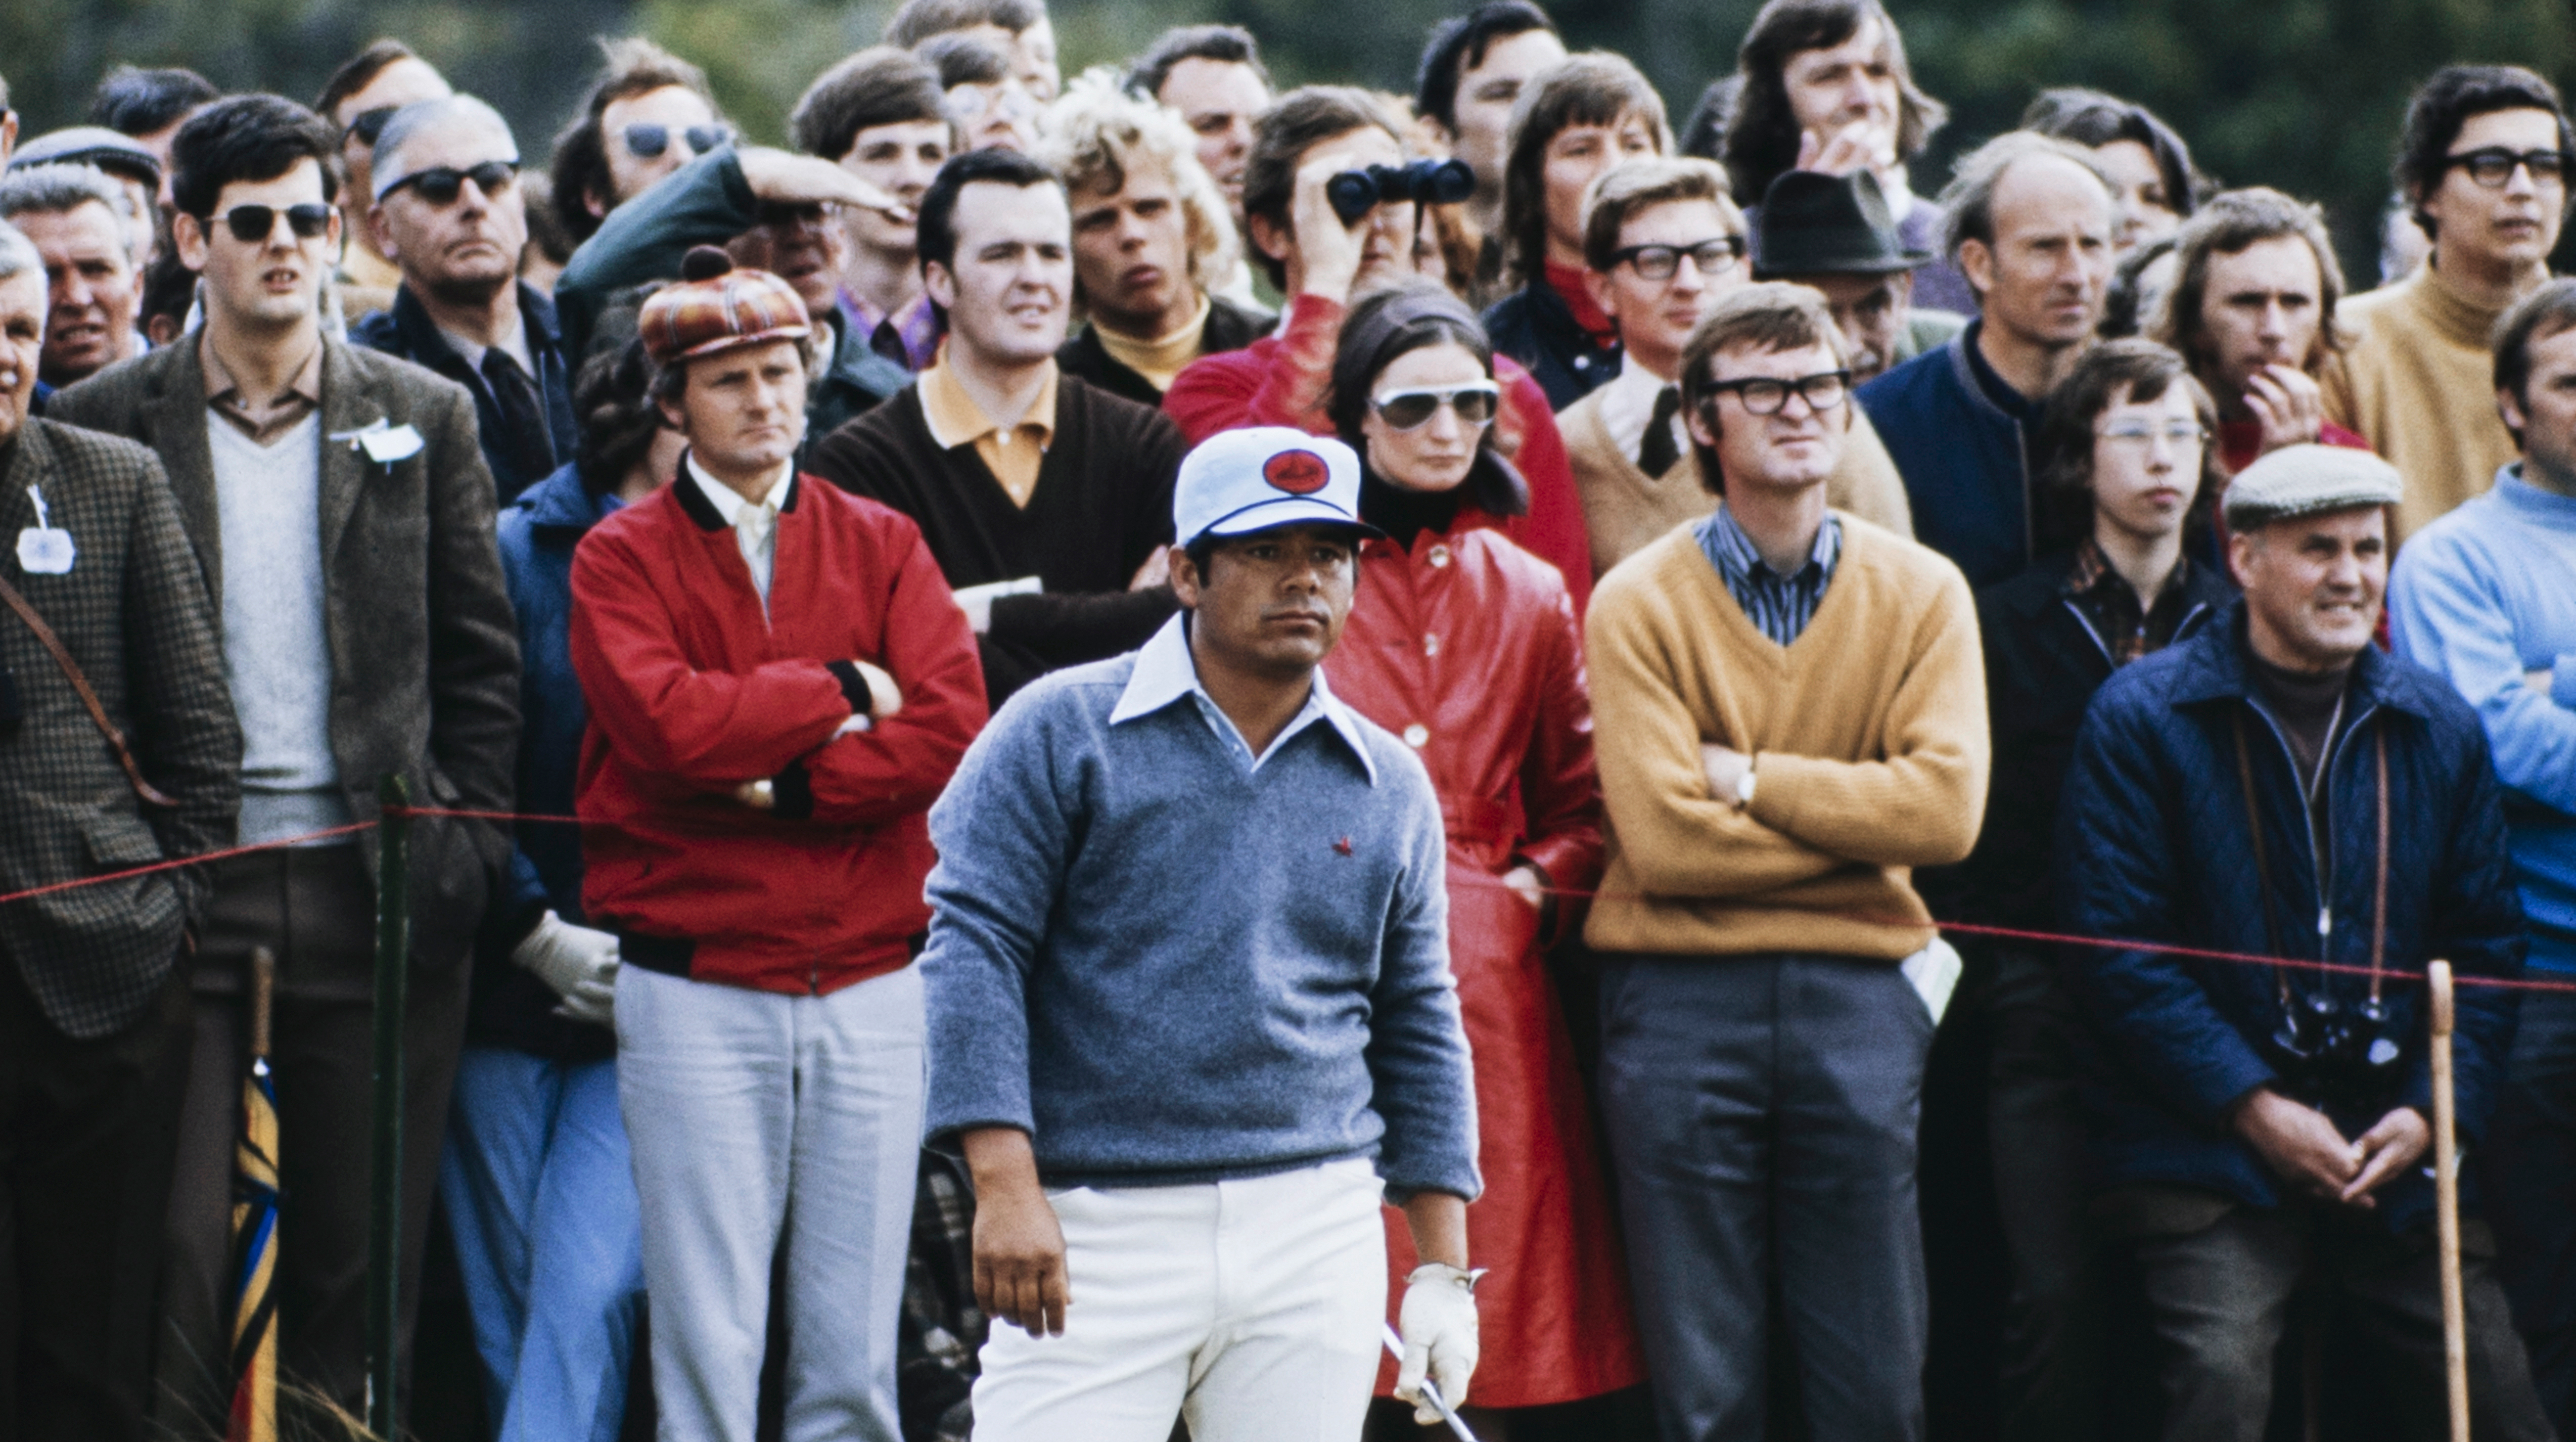 Lee Trevino at the 1972 Open